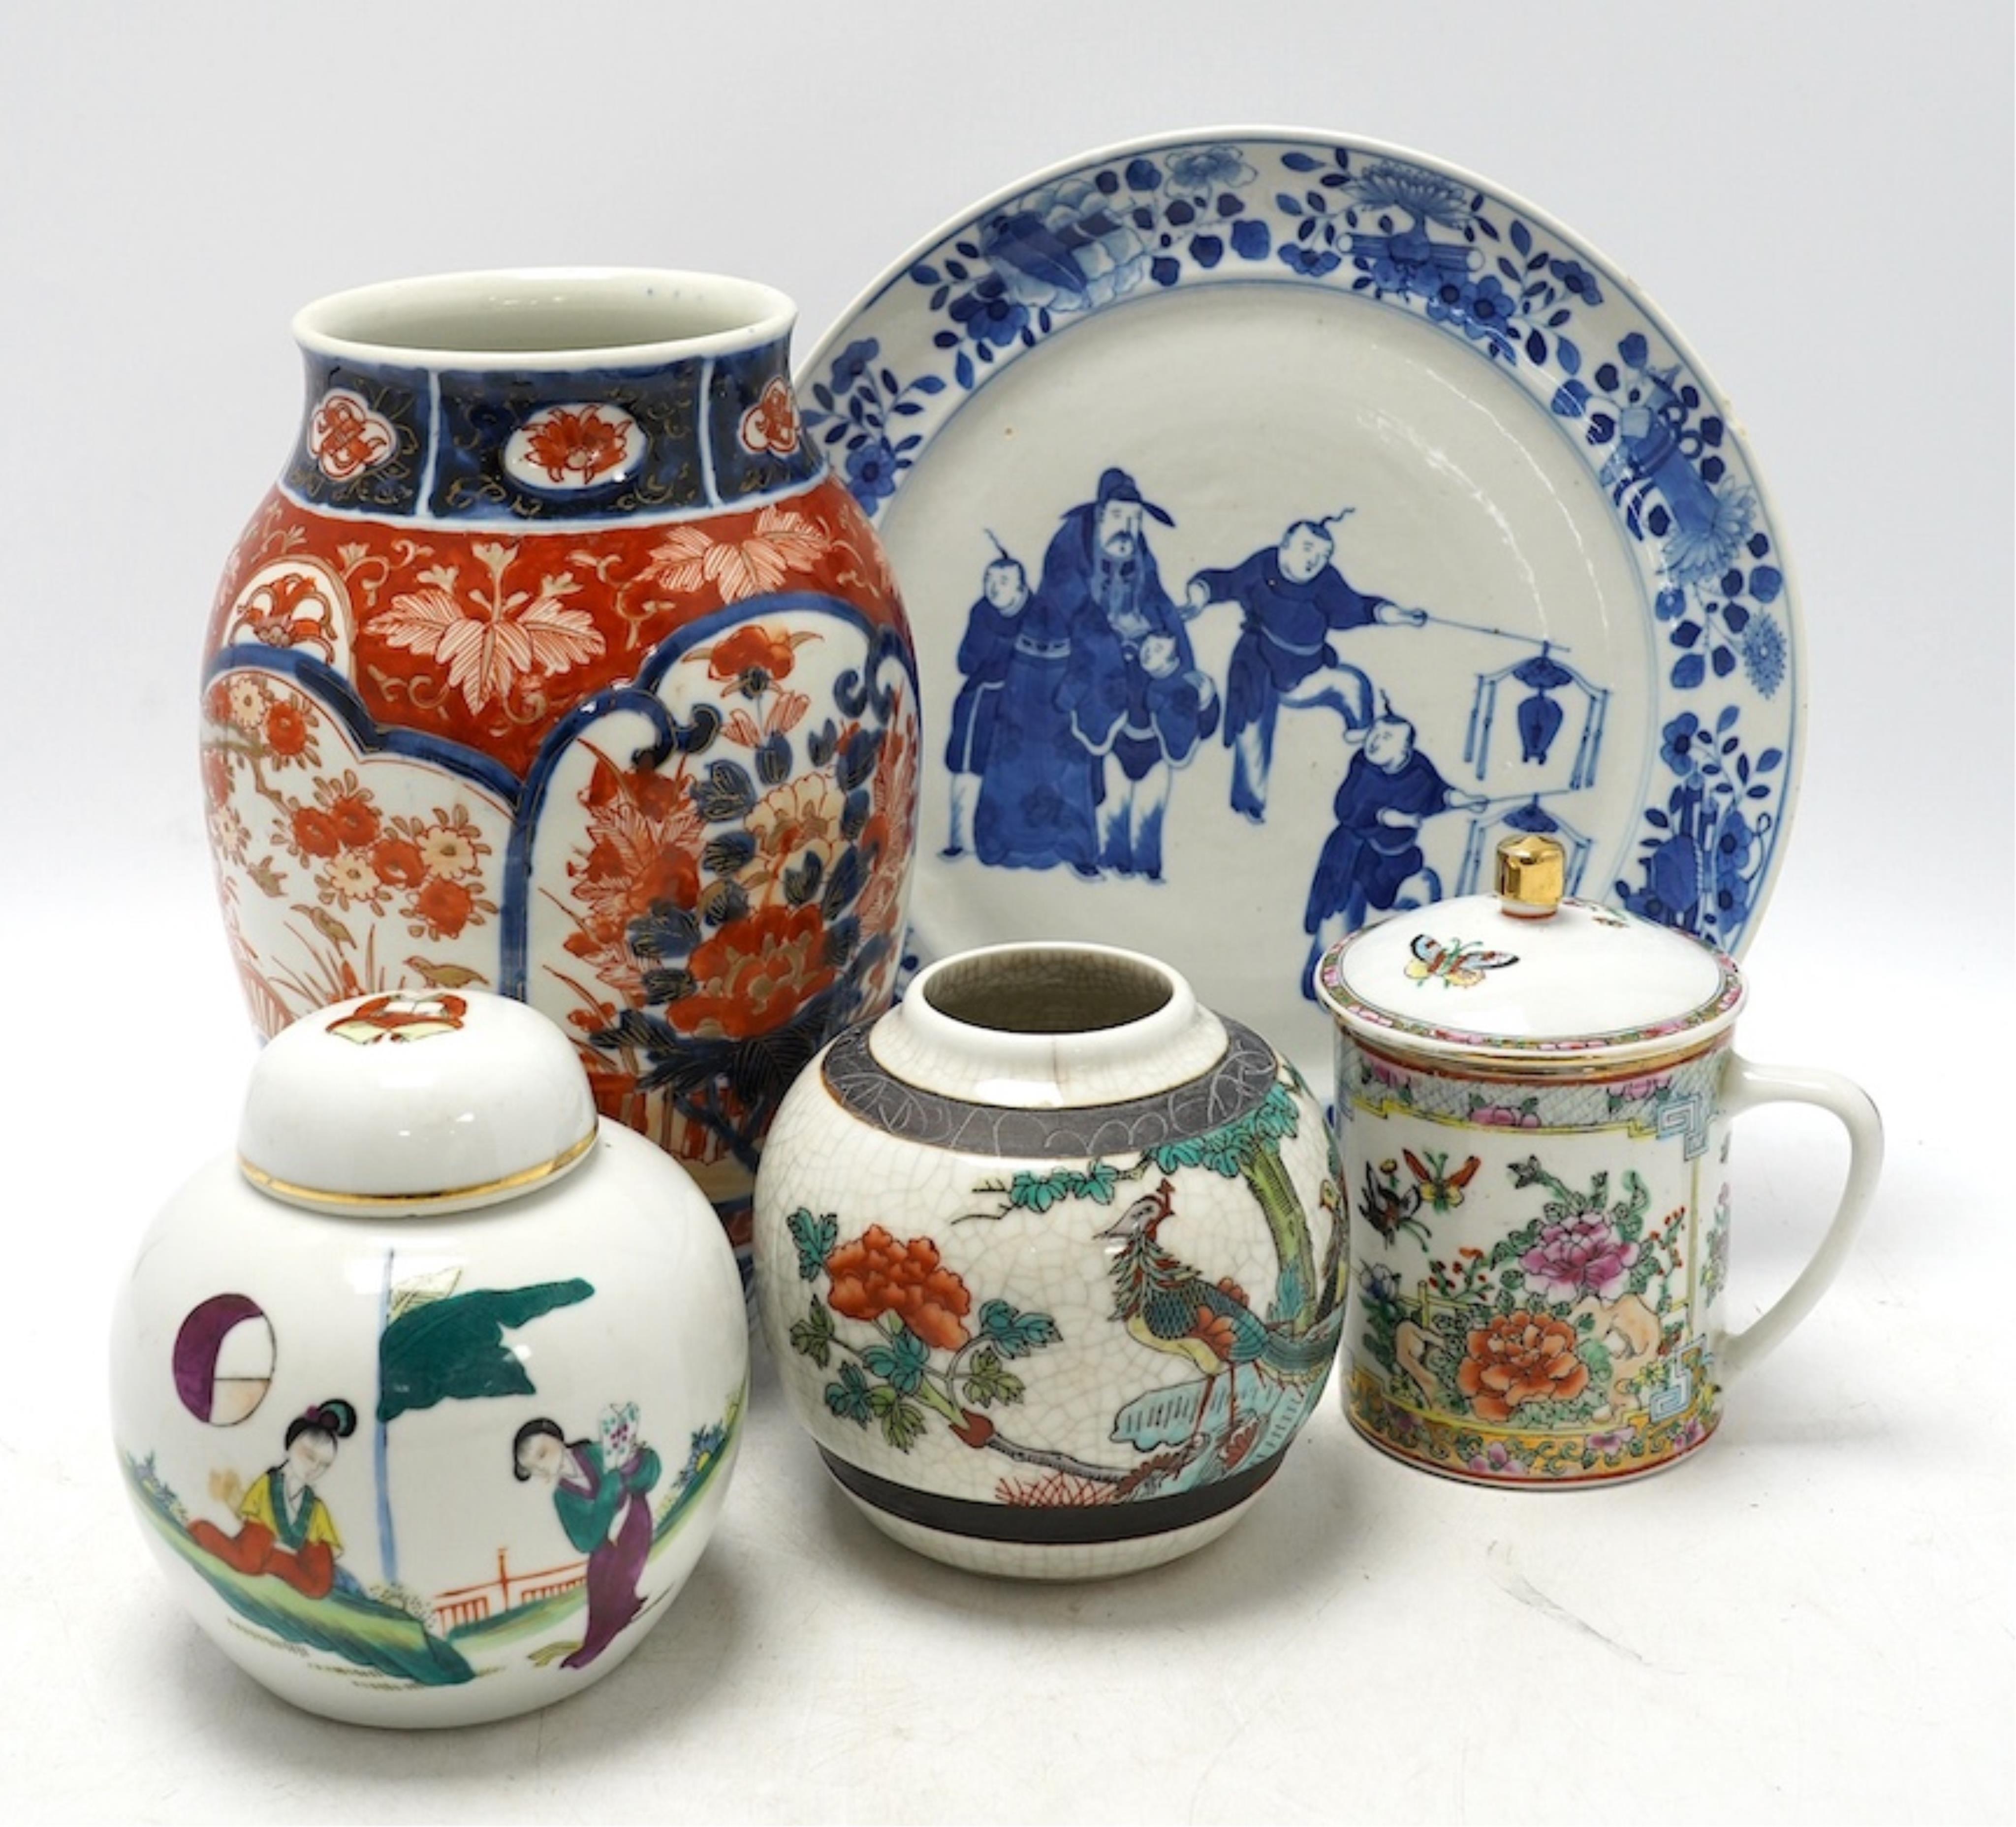 A quantity of Chinese and Japanese ceramics including Kutani, Imari, famille rose etc. tallest 22cm. Condition - fair to good